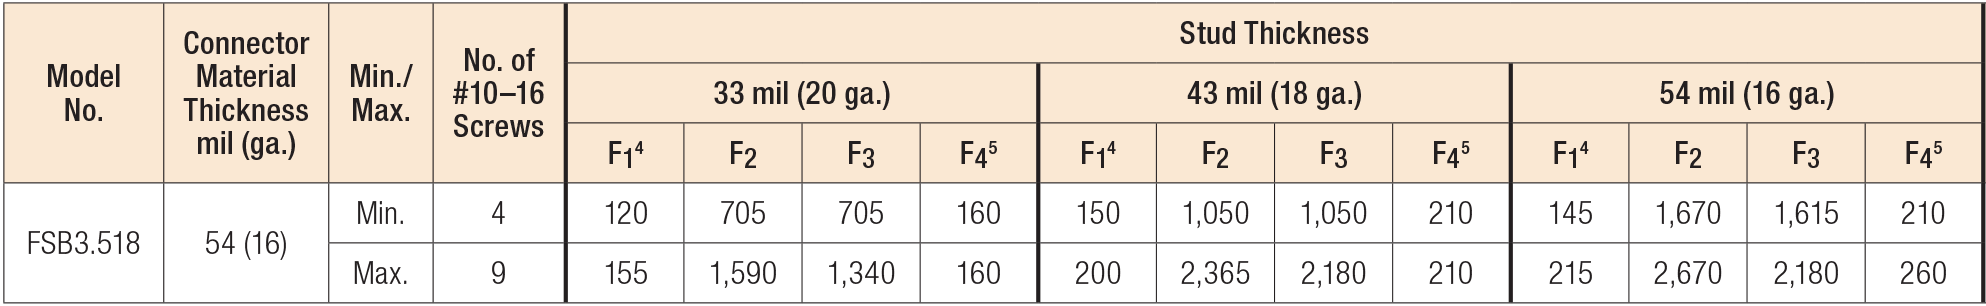 Load Table - FSB Allowable Connector Loads (lb.)